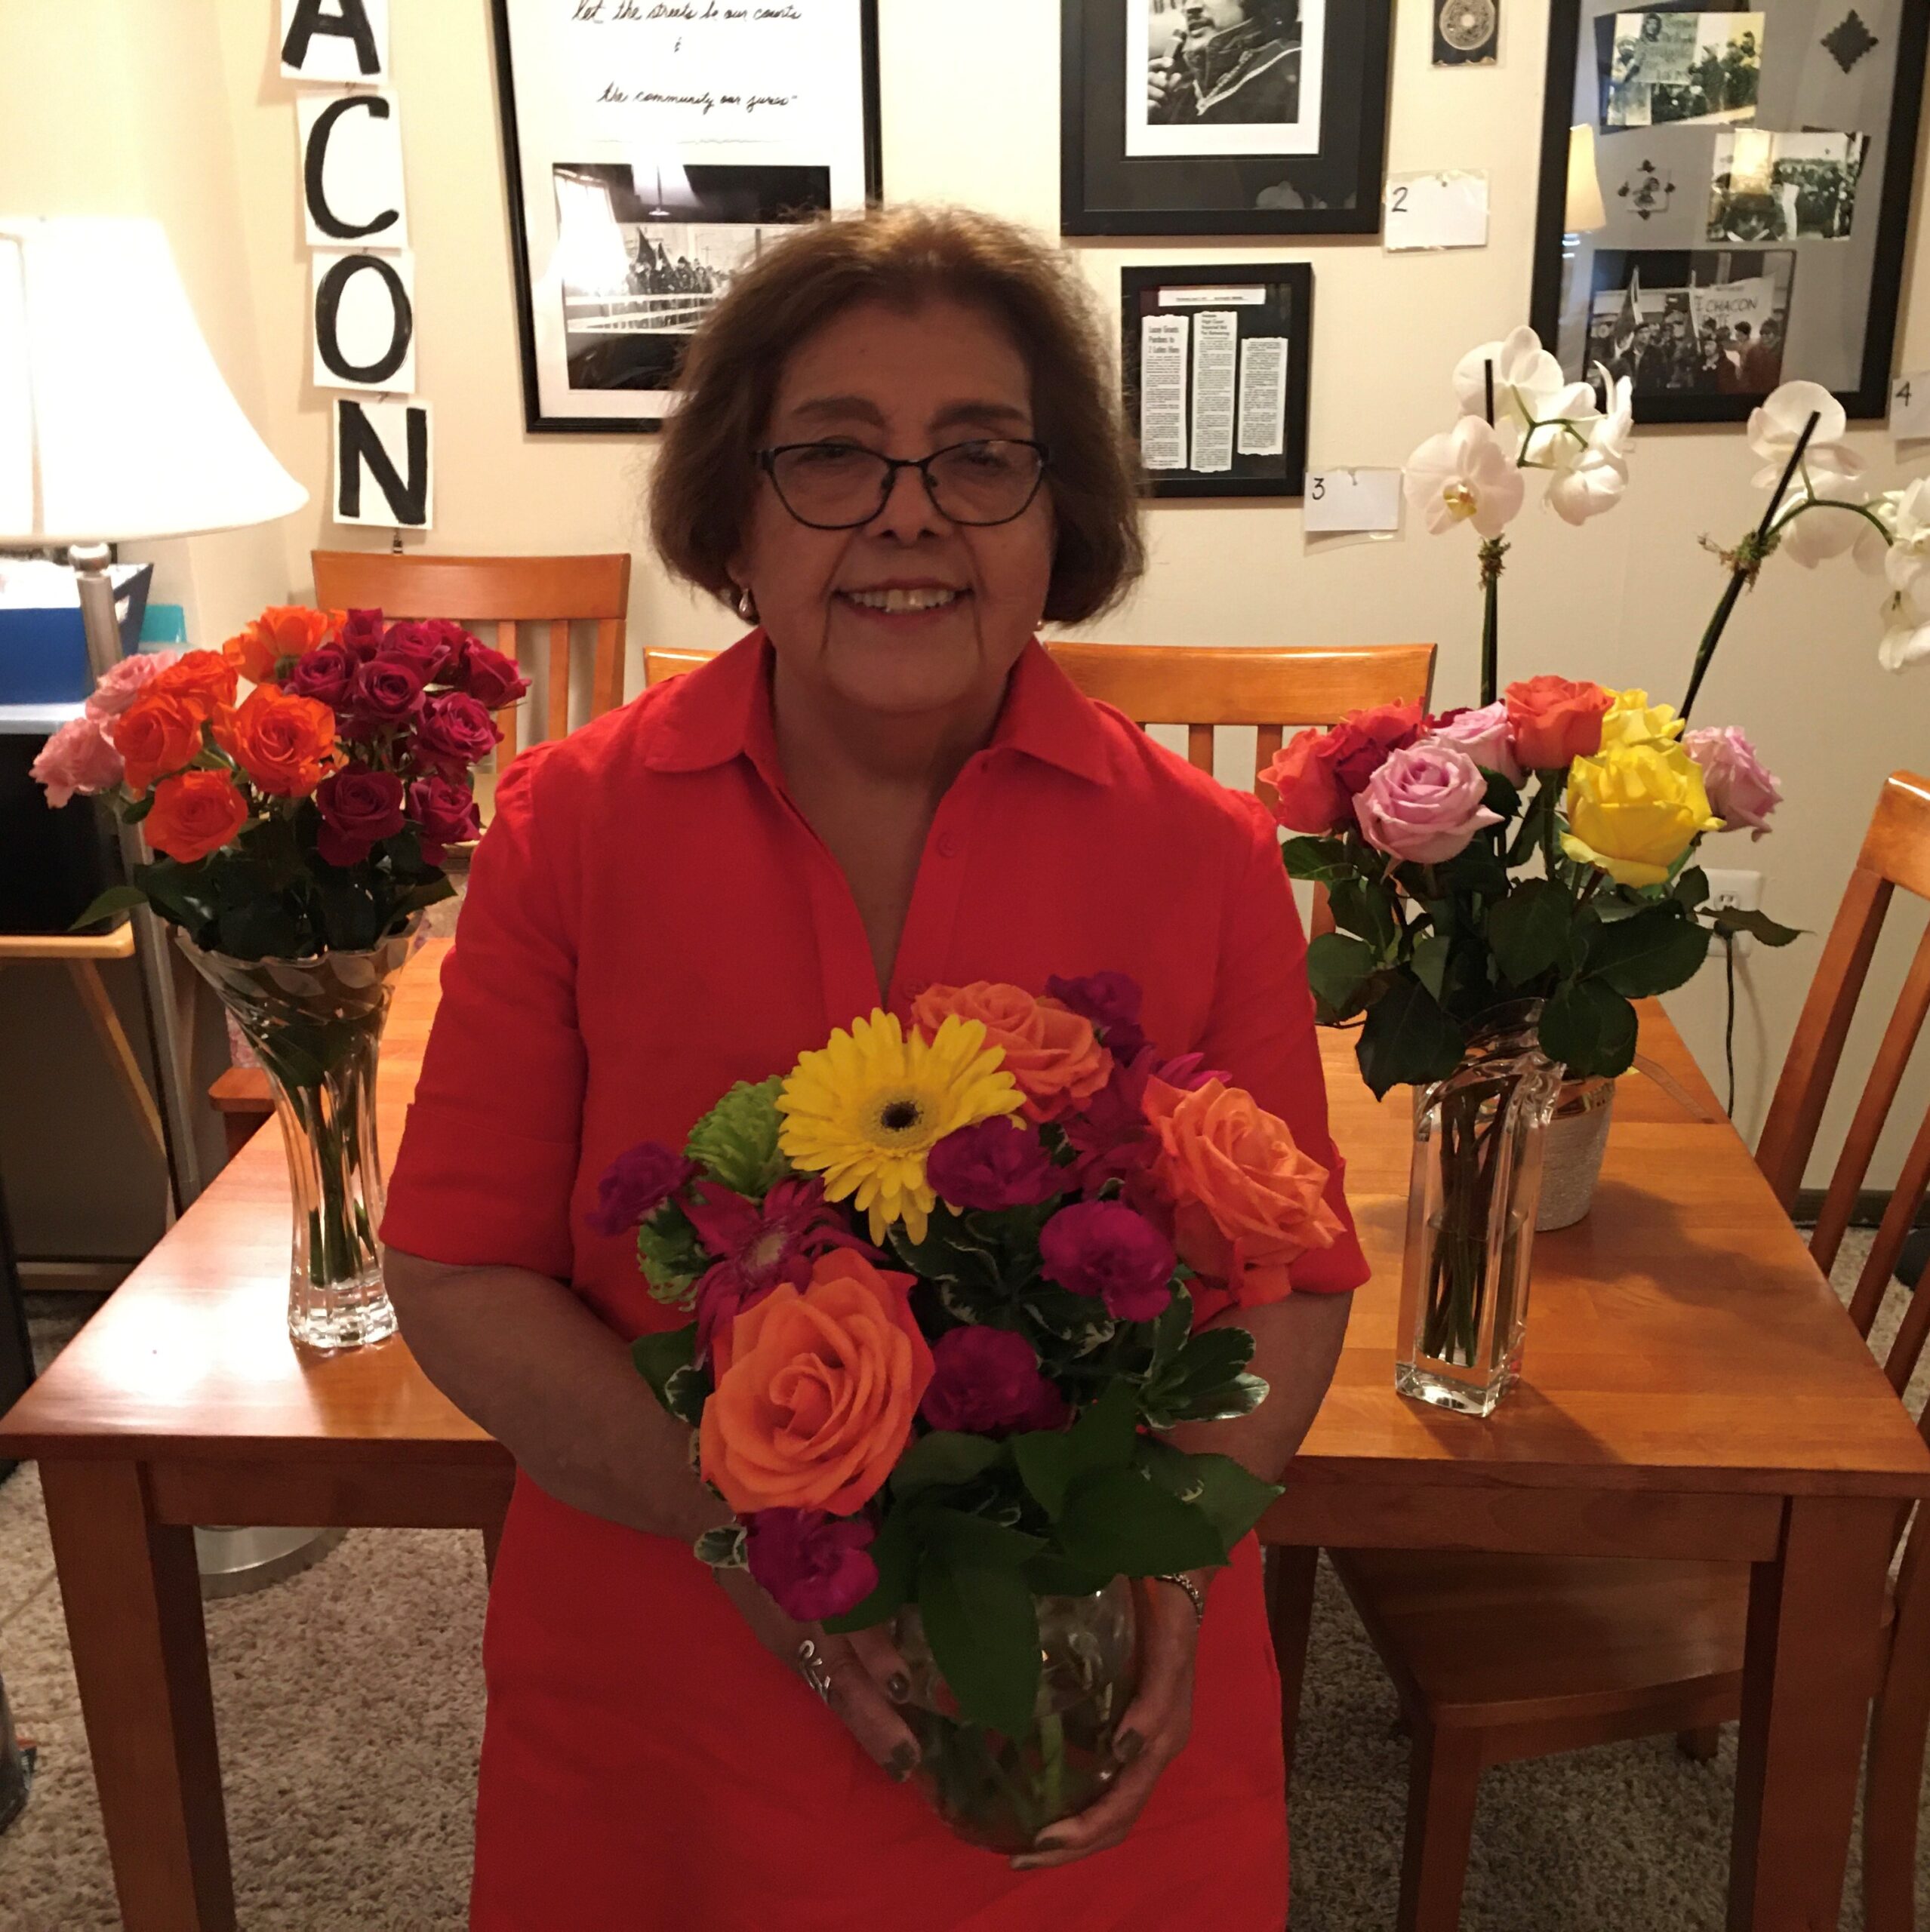 Maria Cruz stands smiling while holding flowers